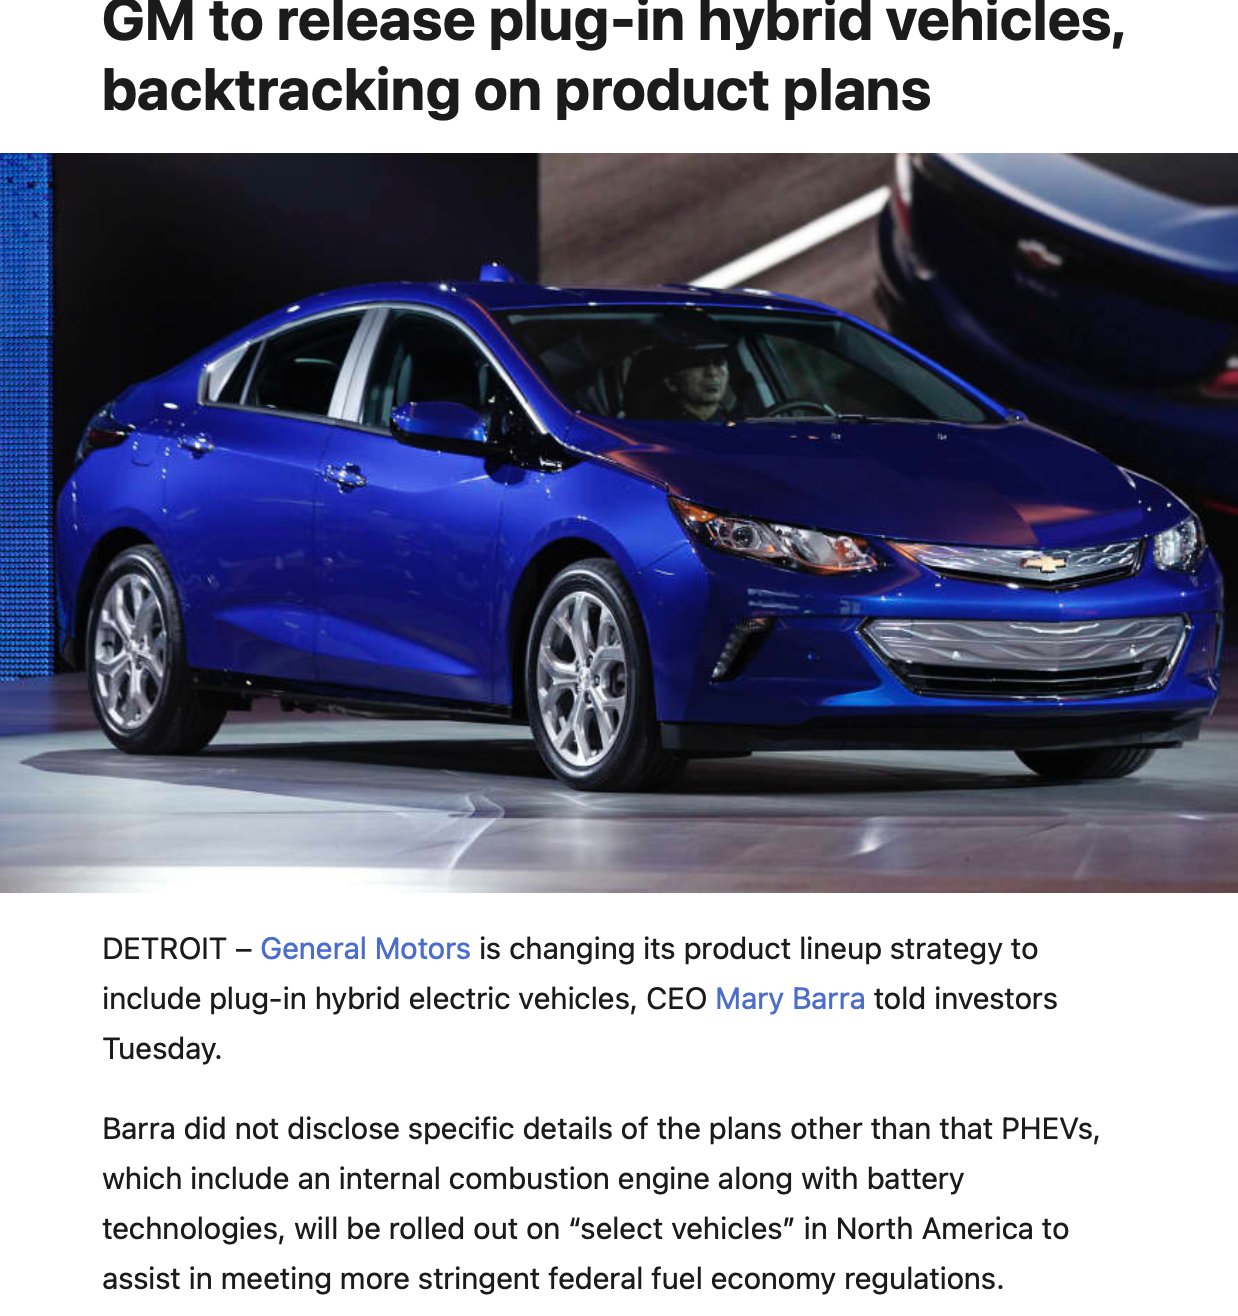 GM to release plug-in hybrid vehicles, backtracking on product plans